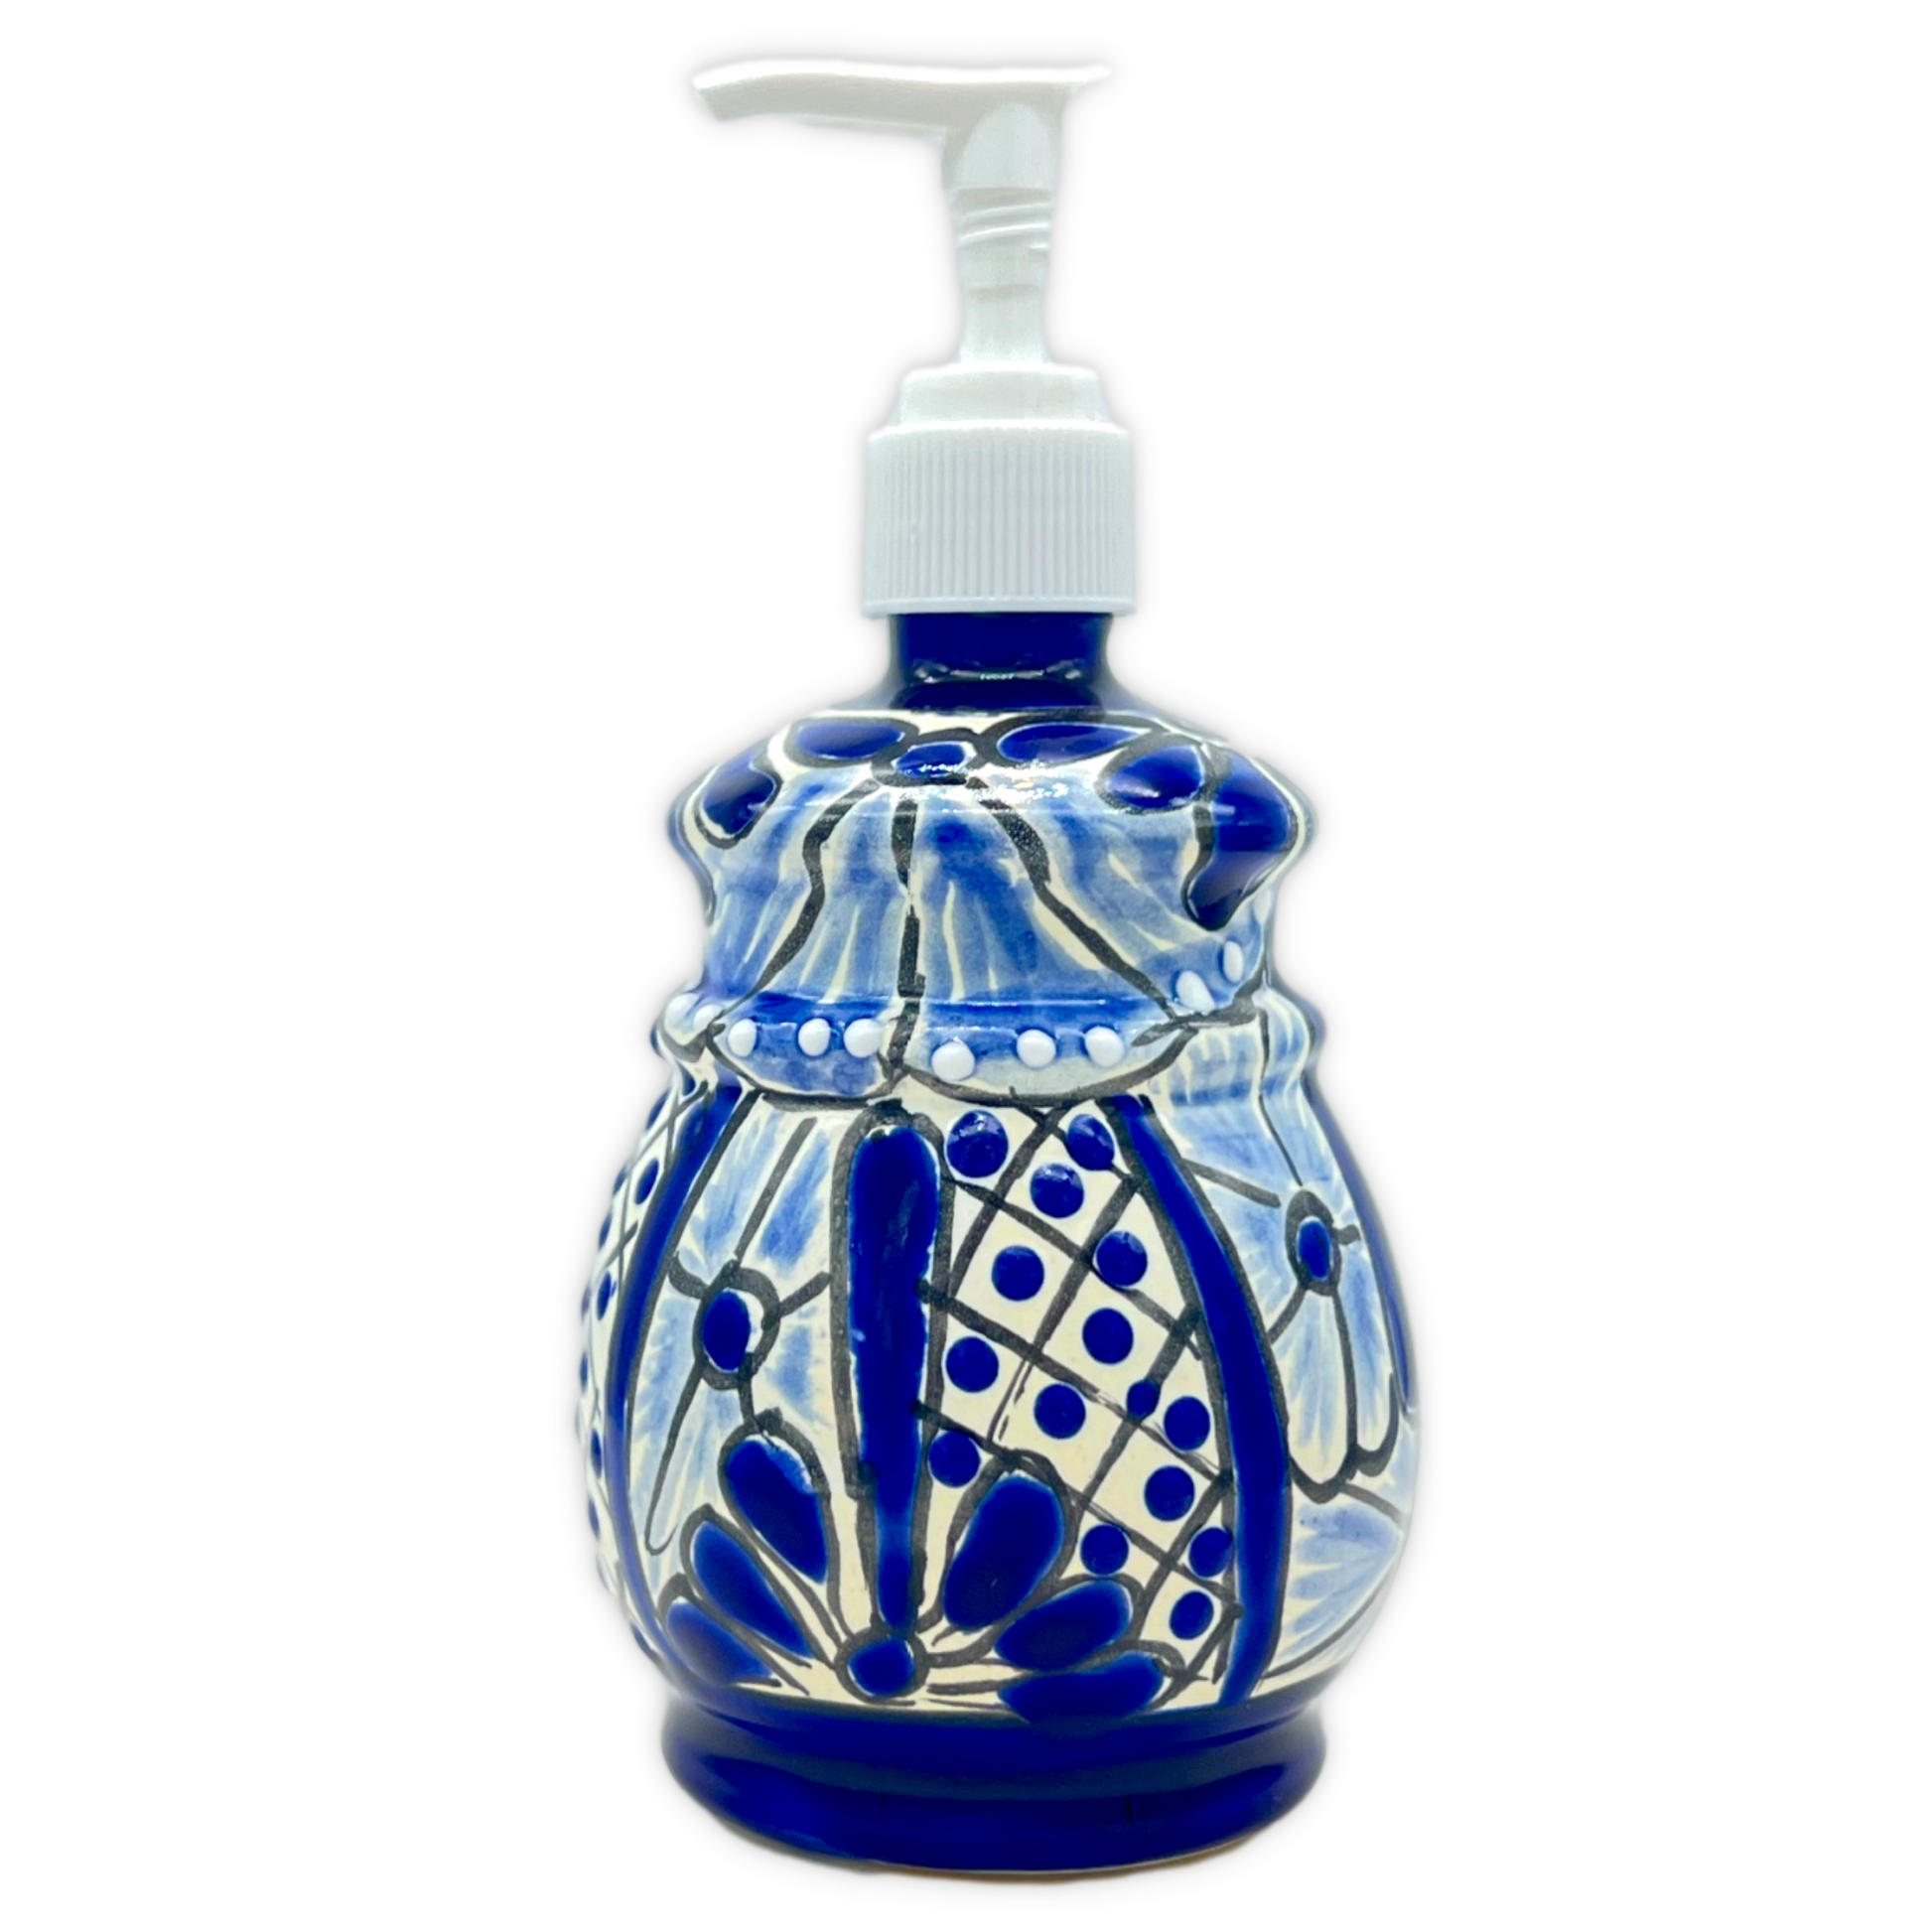 front of Hand-painted Talavera Ceramic Soap Dispenser in blue and white, a unique addition to kitchen or bathroom decor.